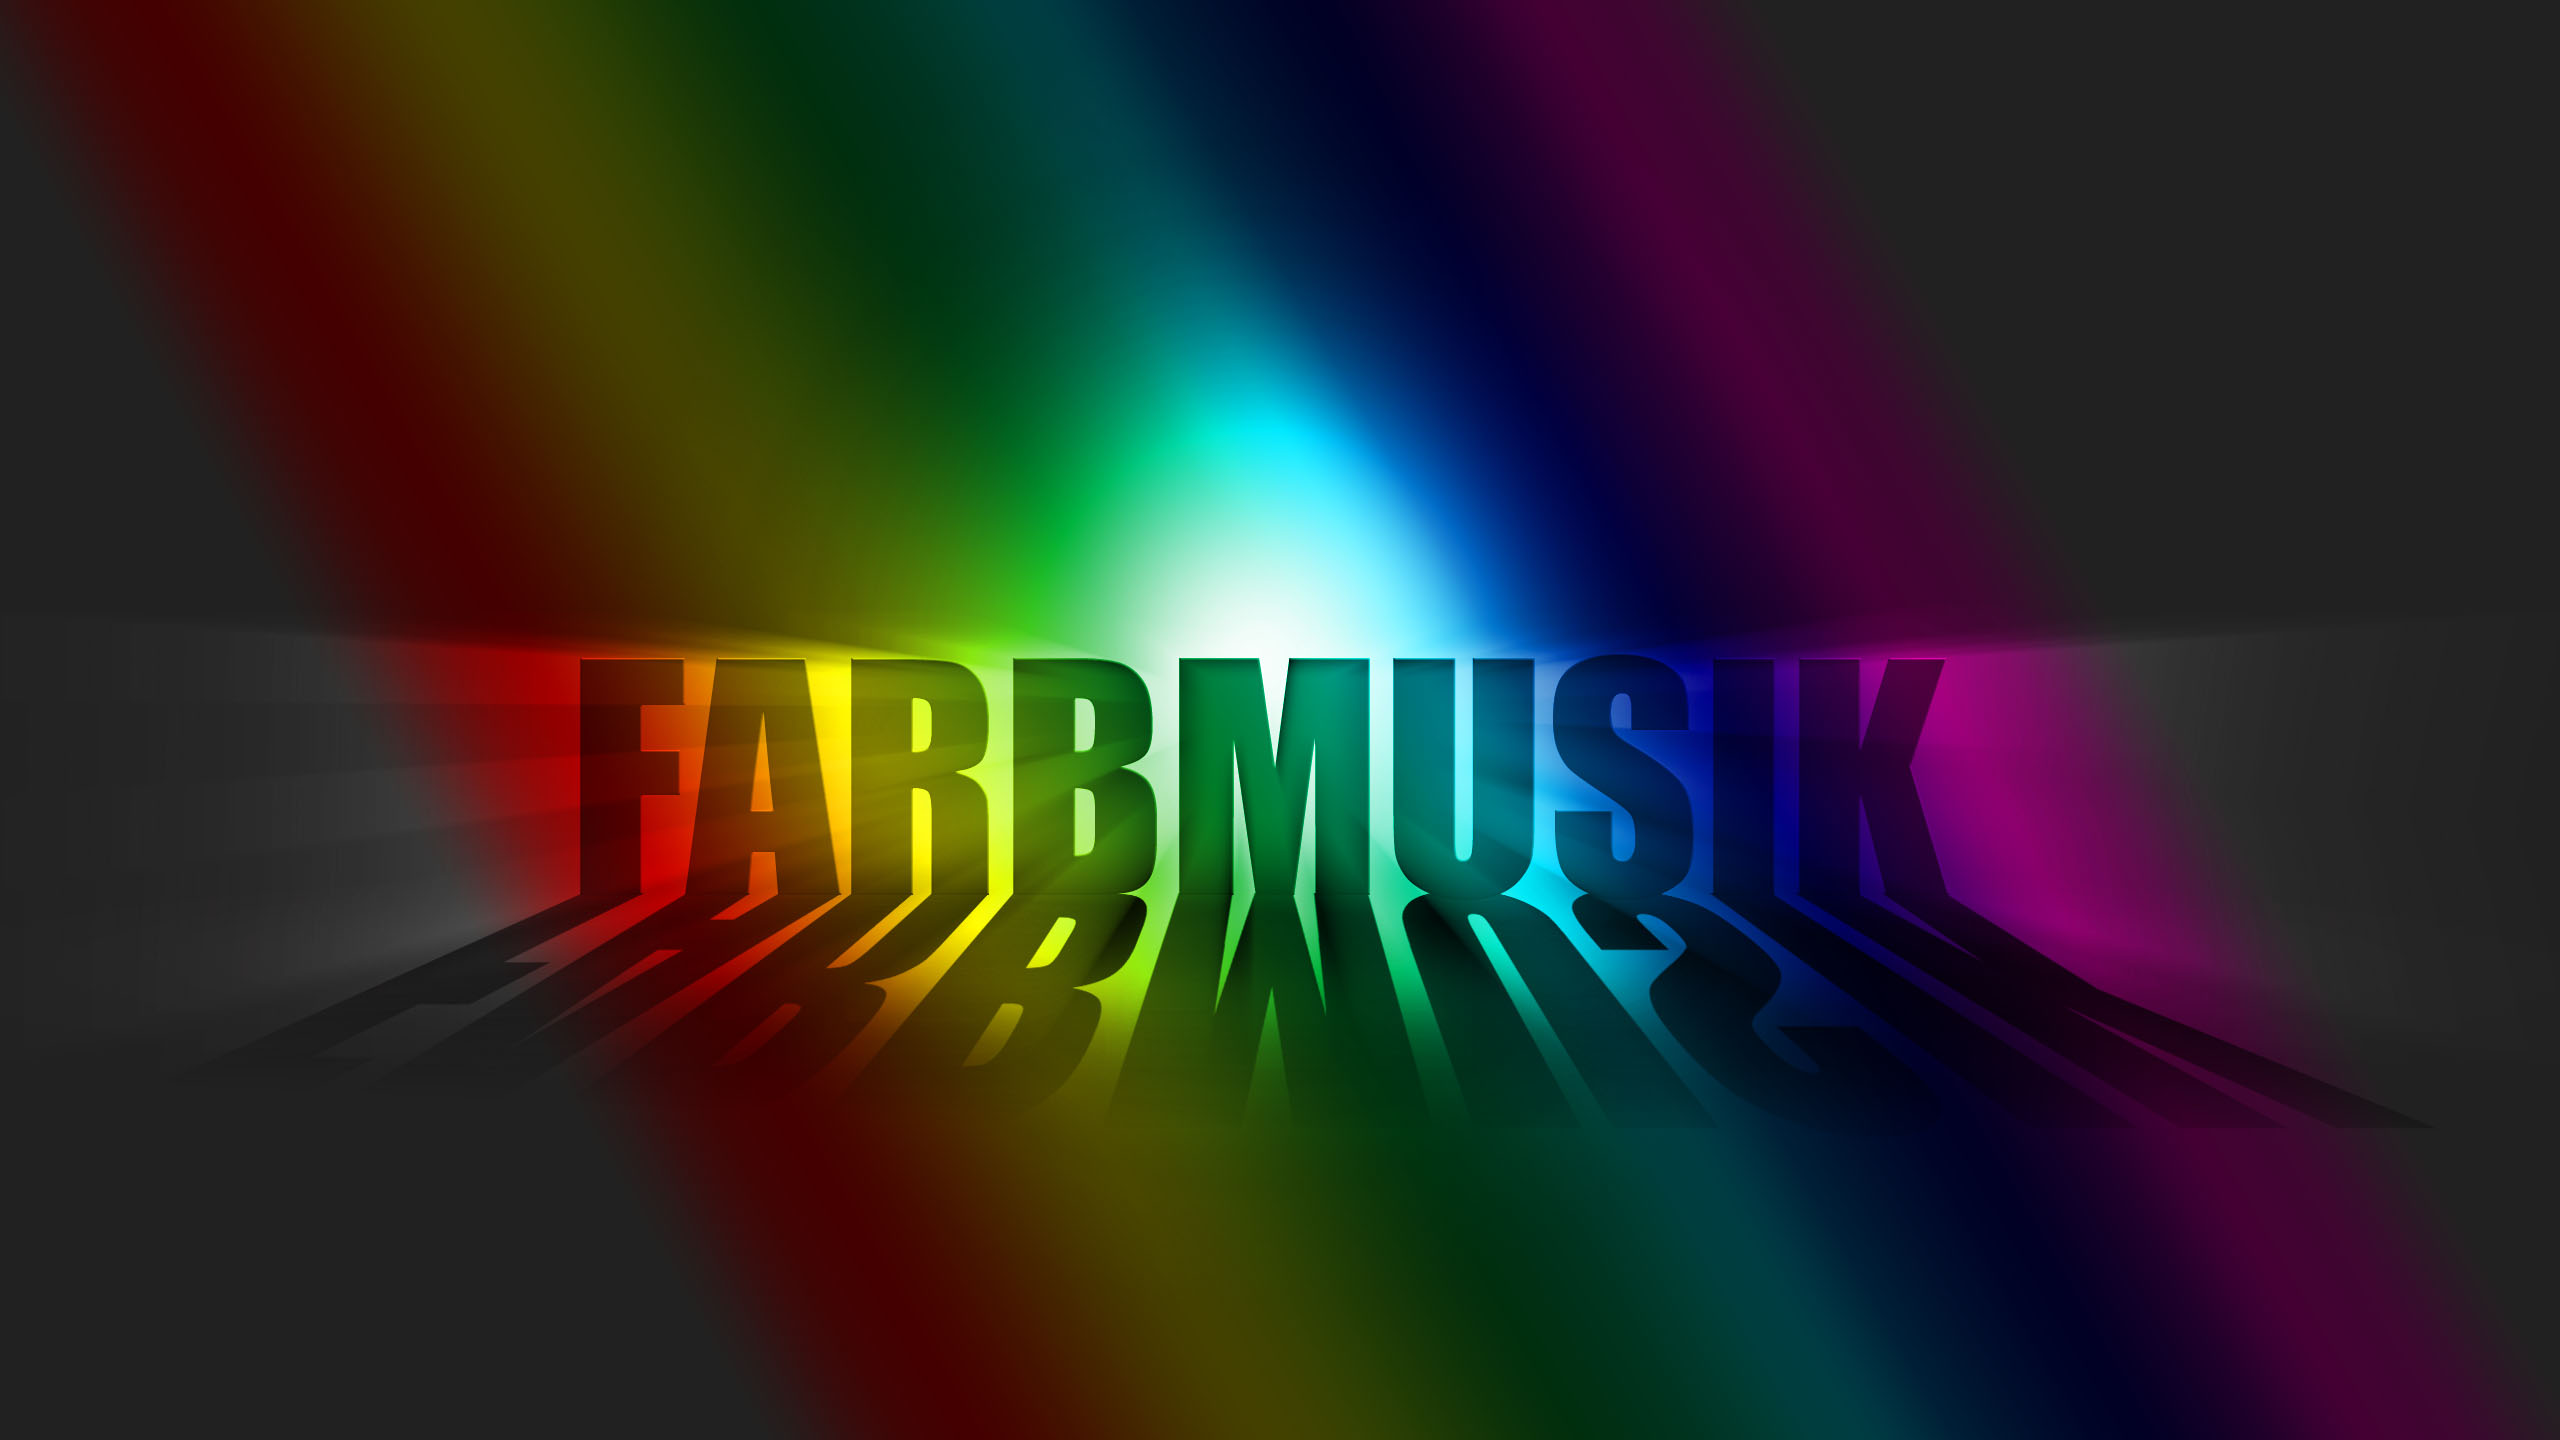 Farbmusik - Music related to colors